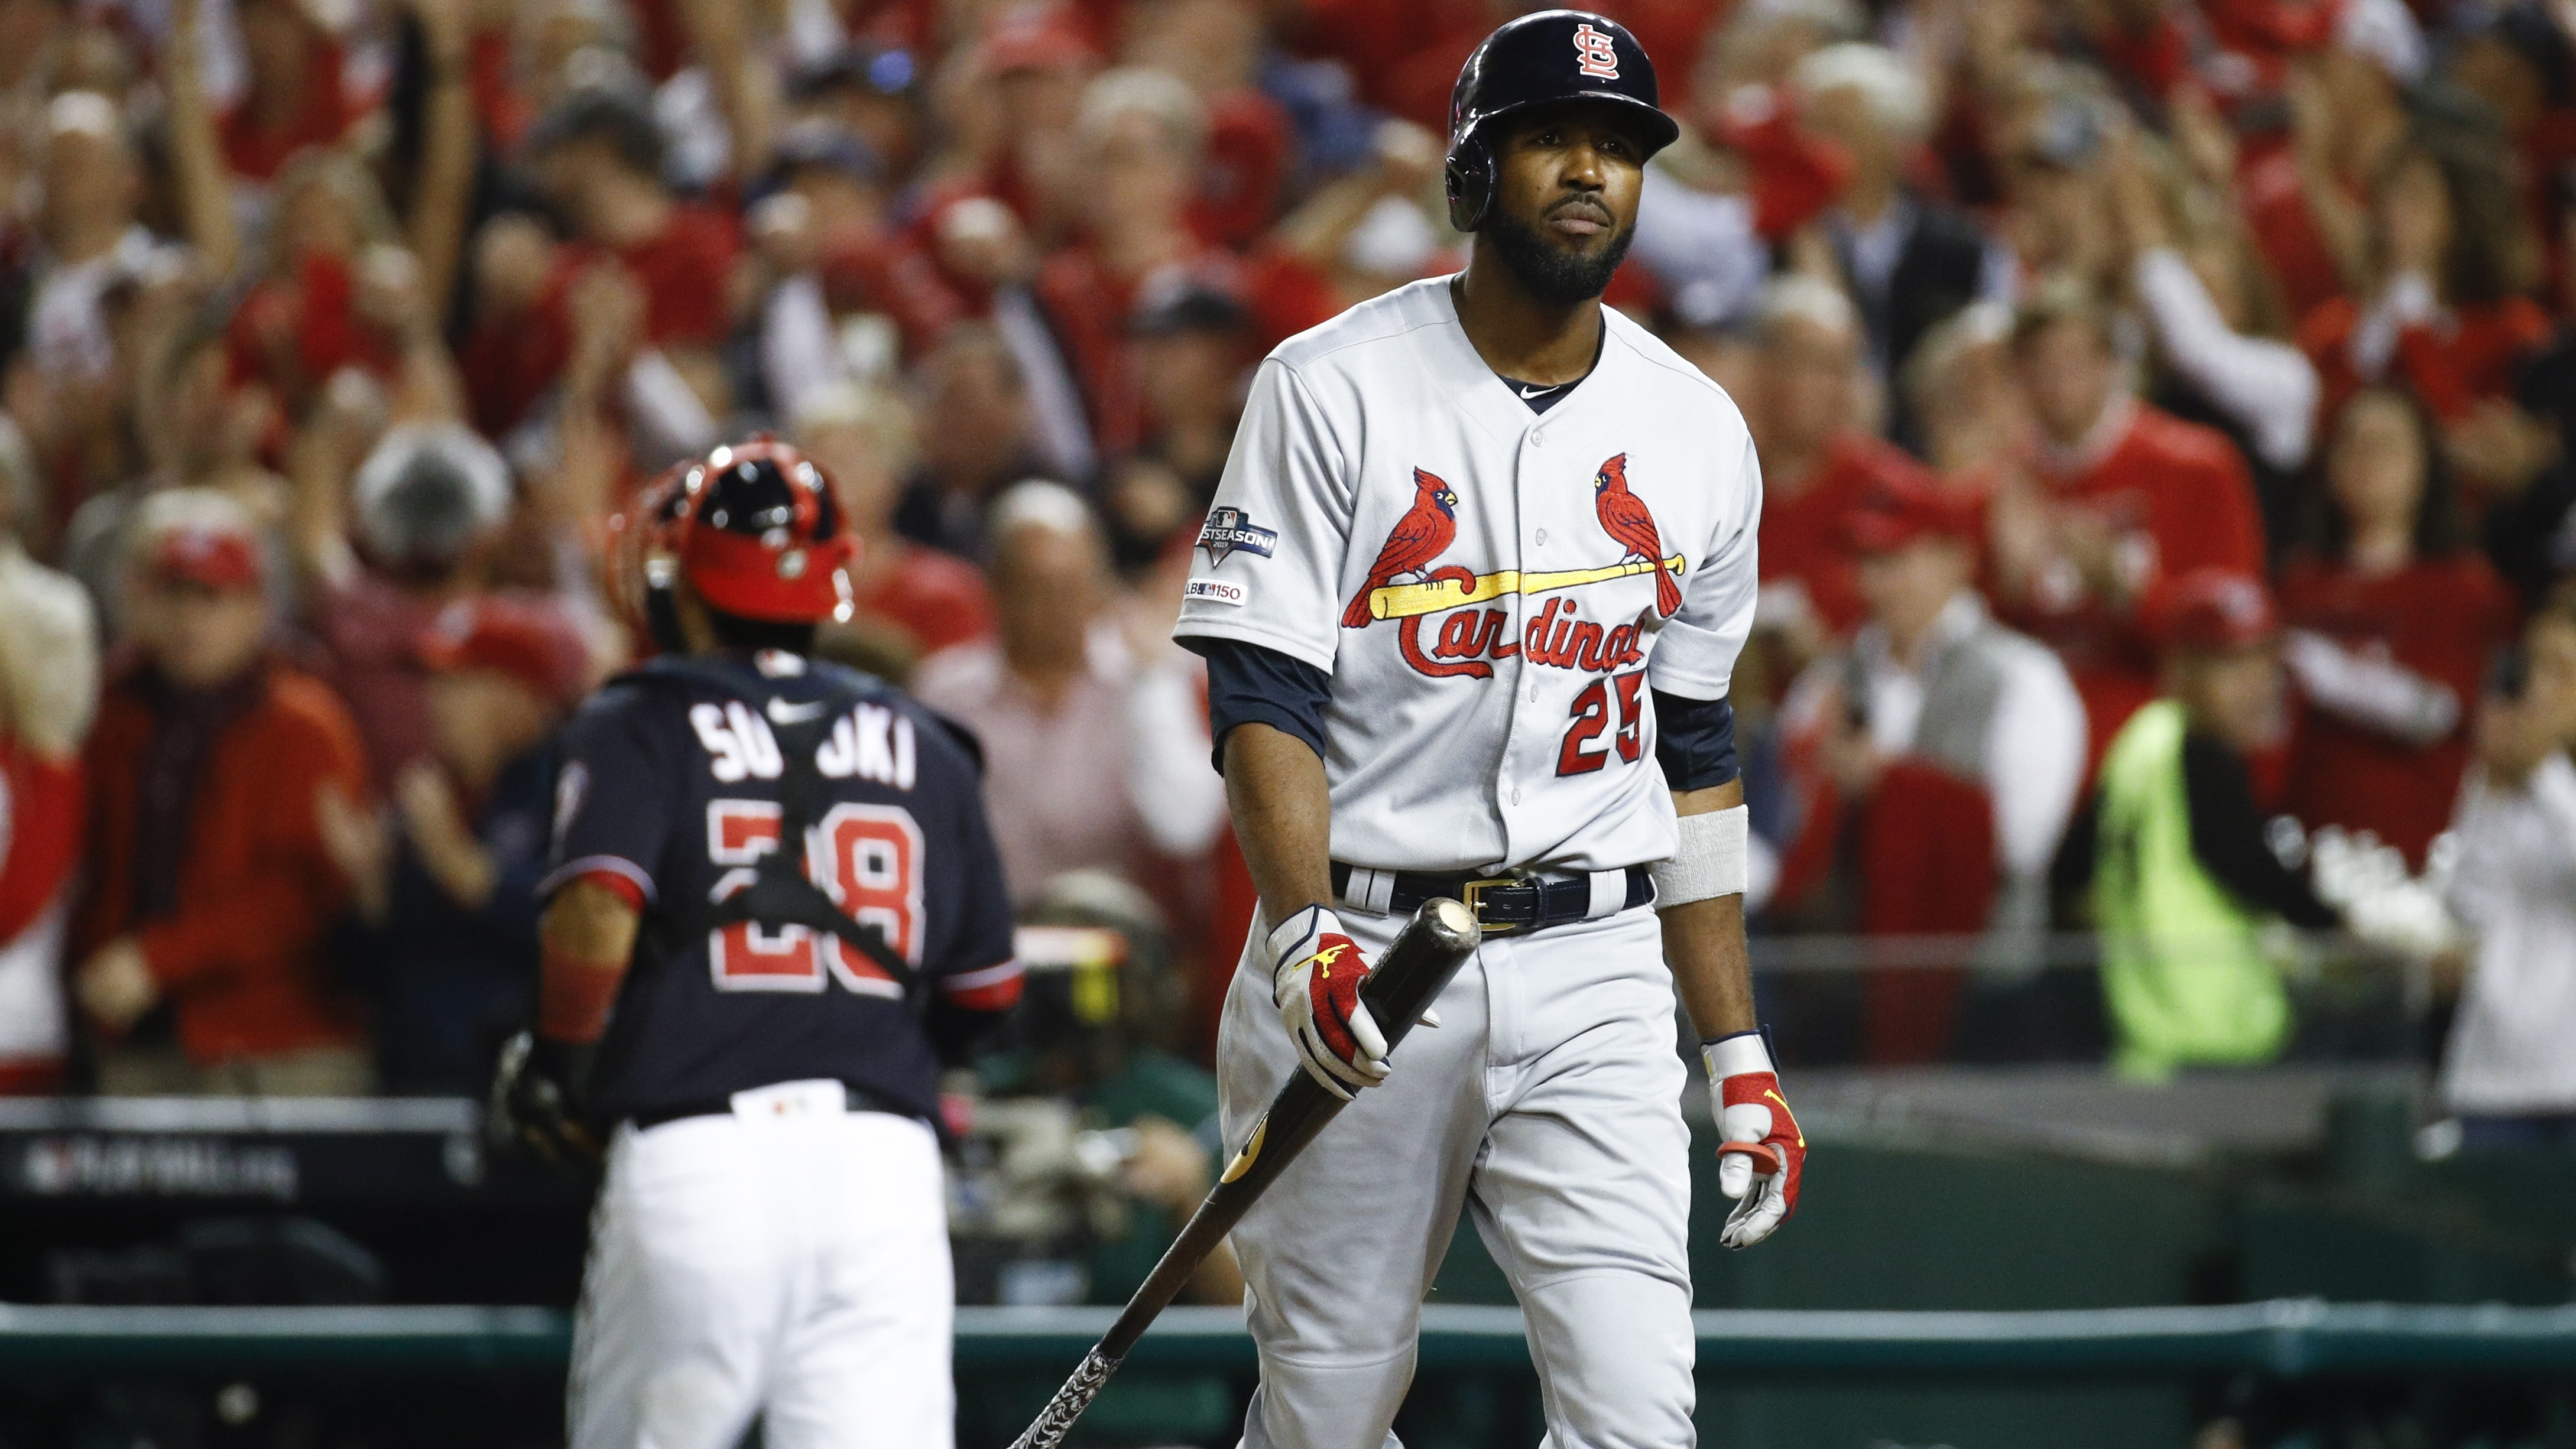 Cardinals fall into 3-0 hole after failing to hit, pitch, run and field